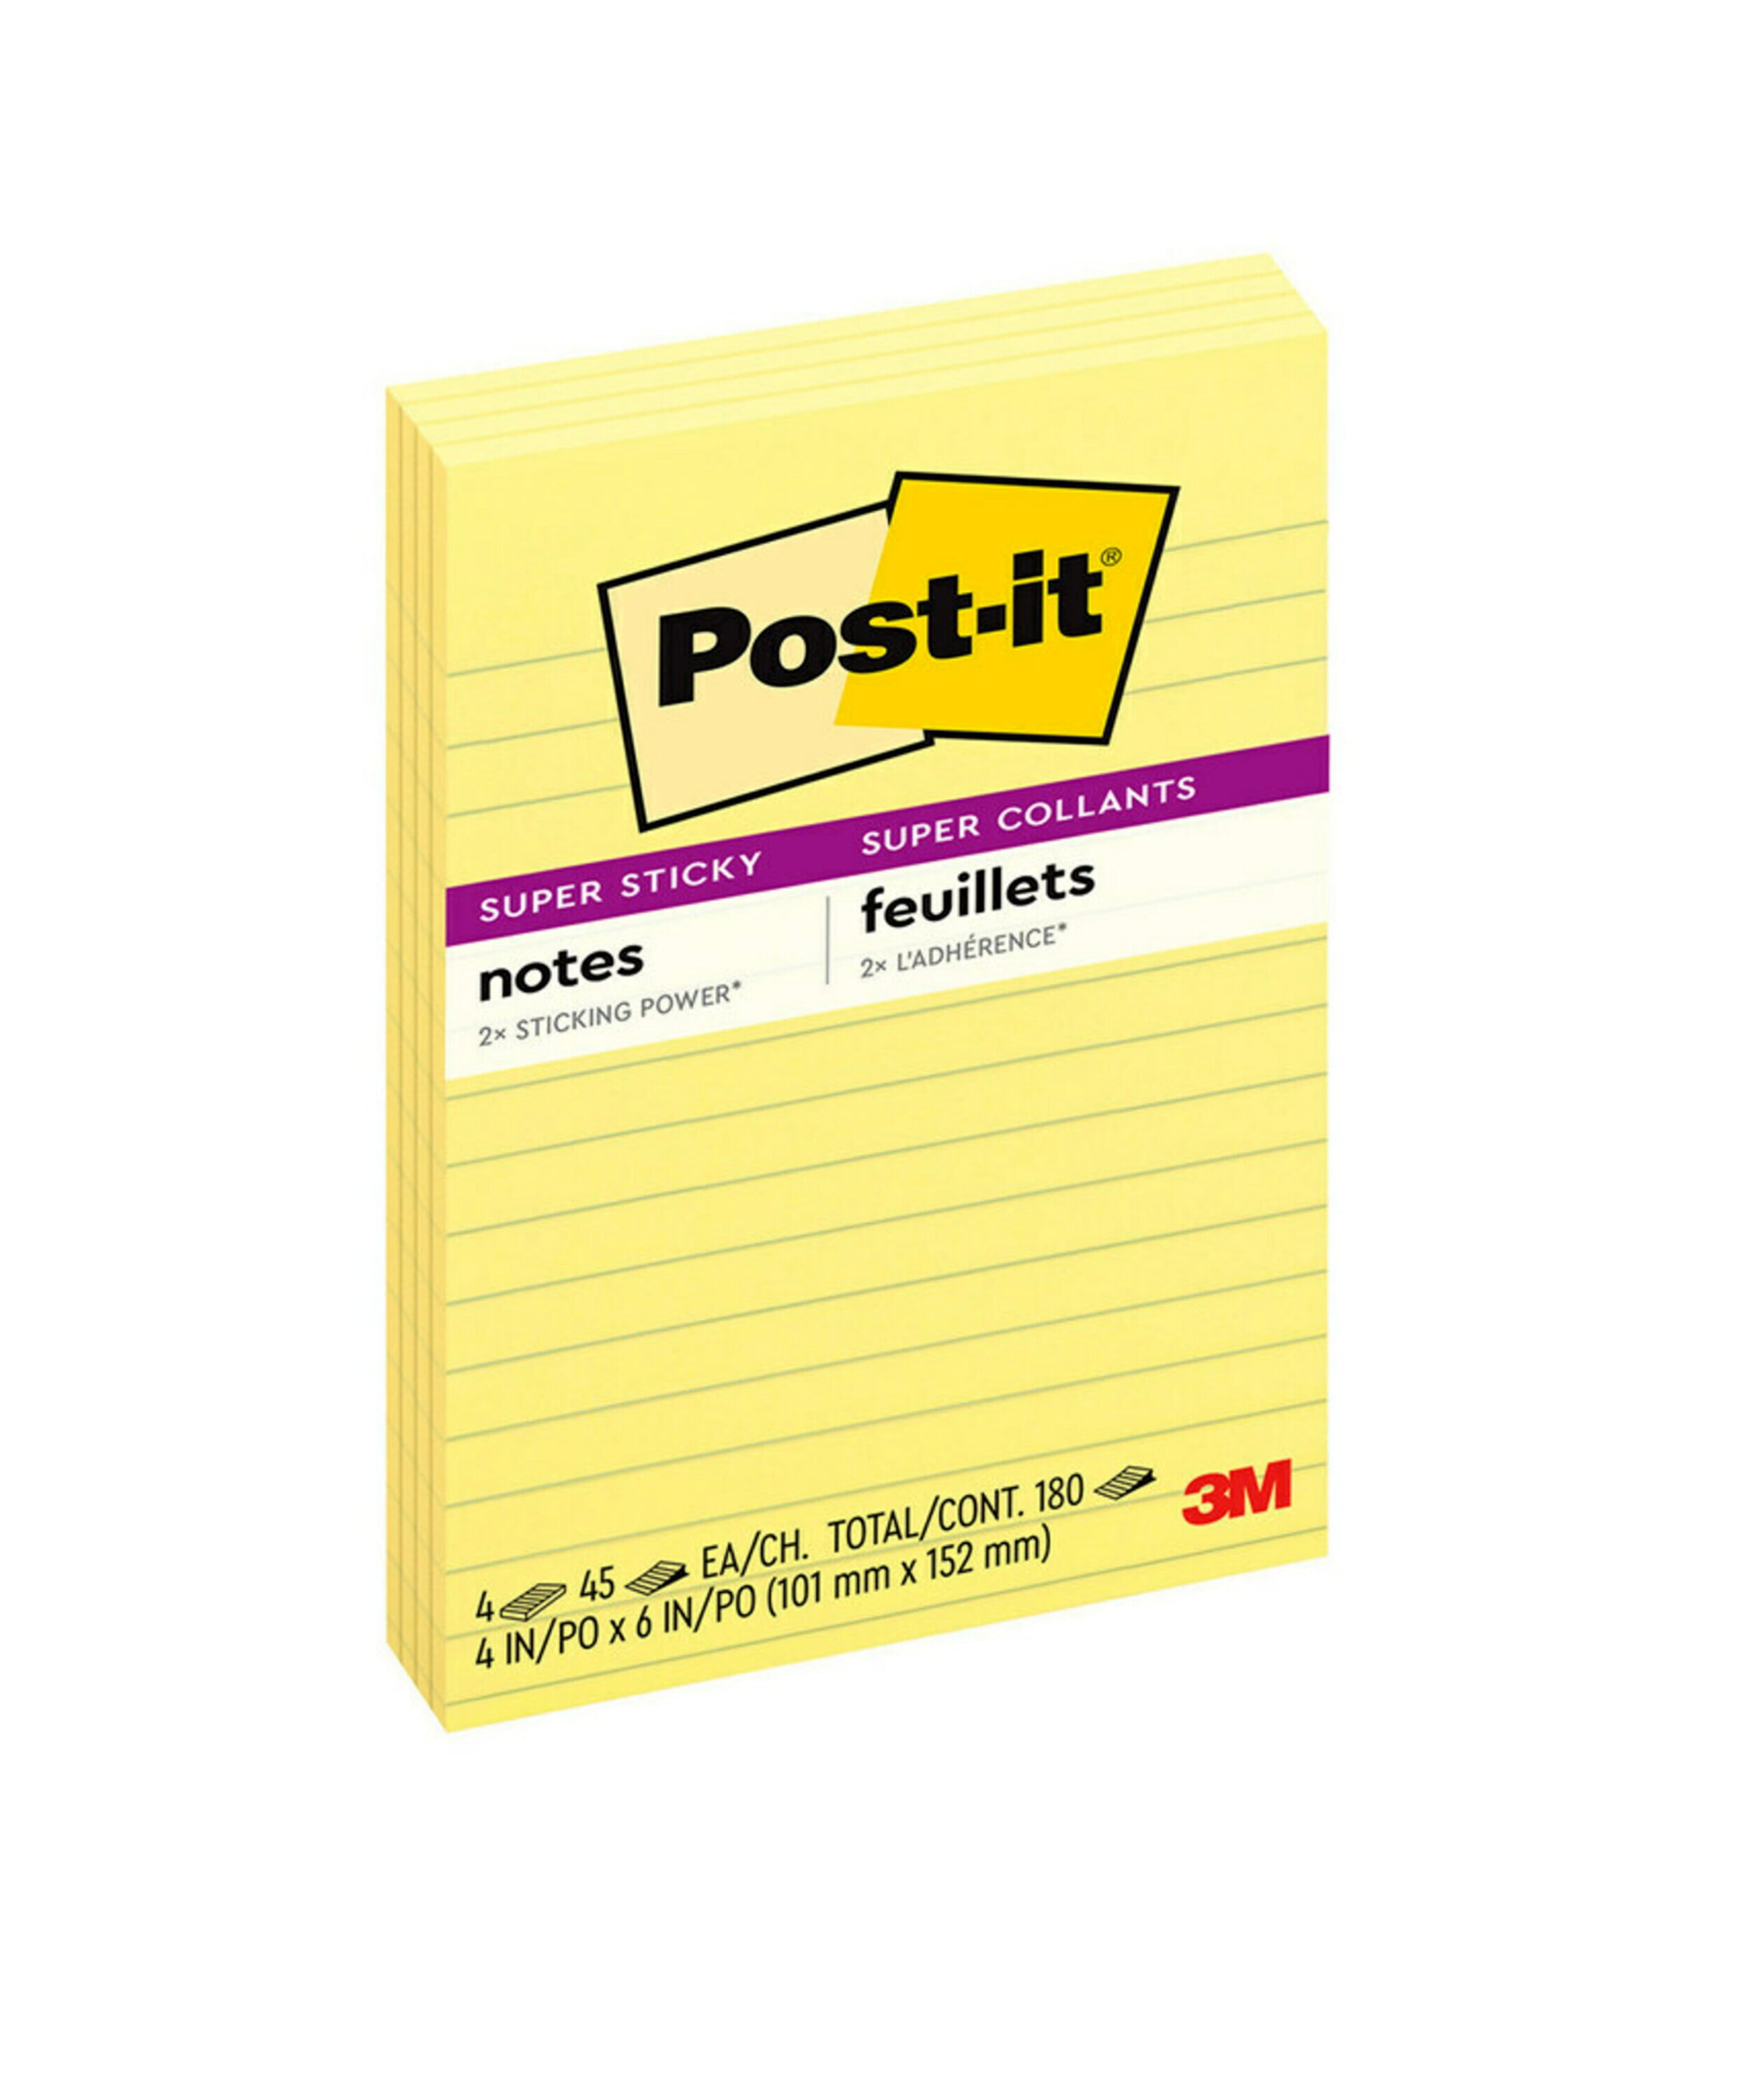 Post-it Super Sticky Lined Notes, 4